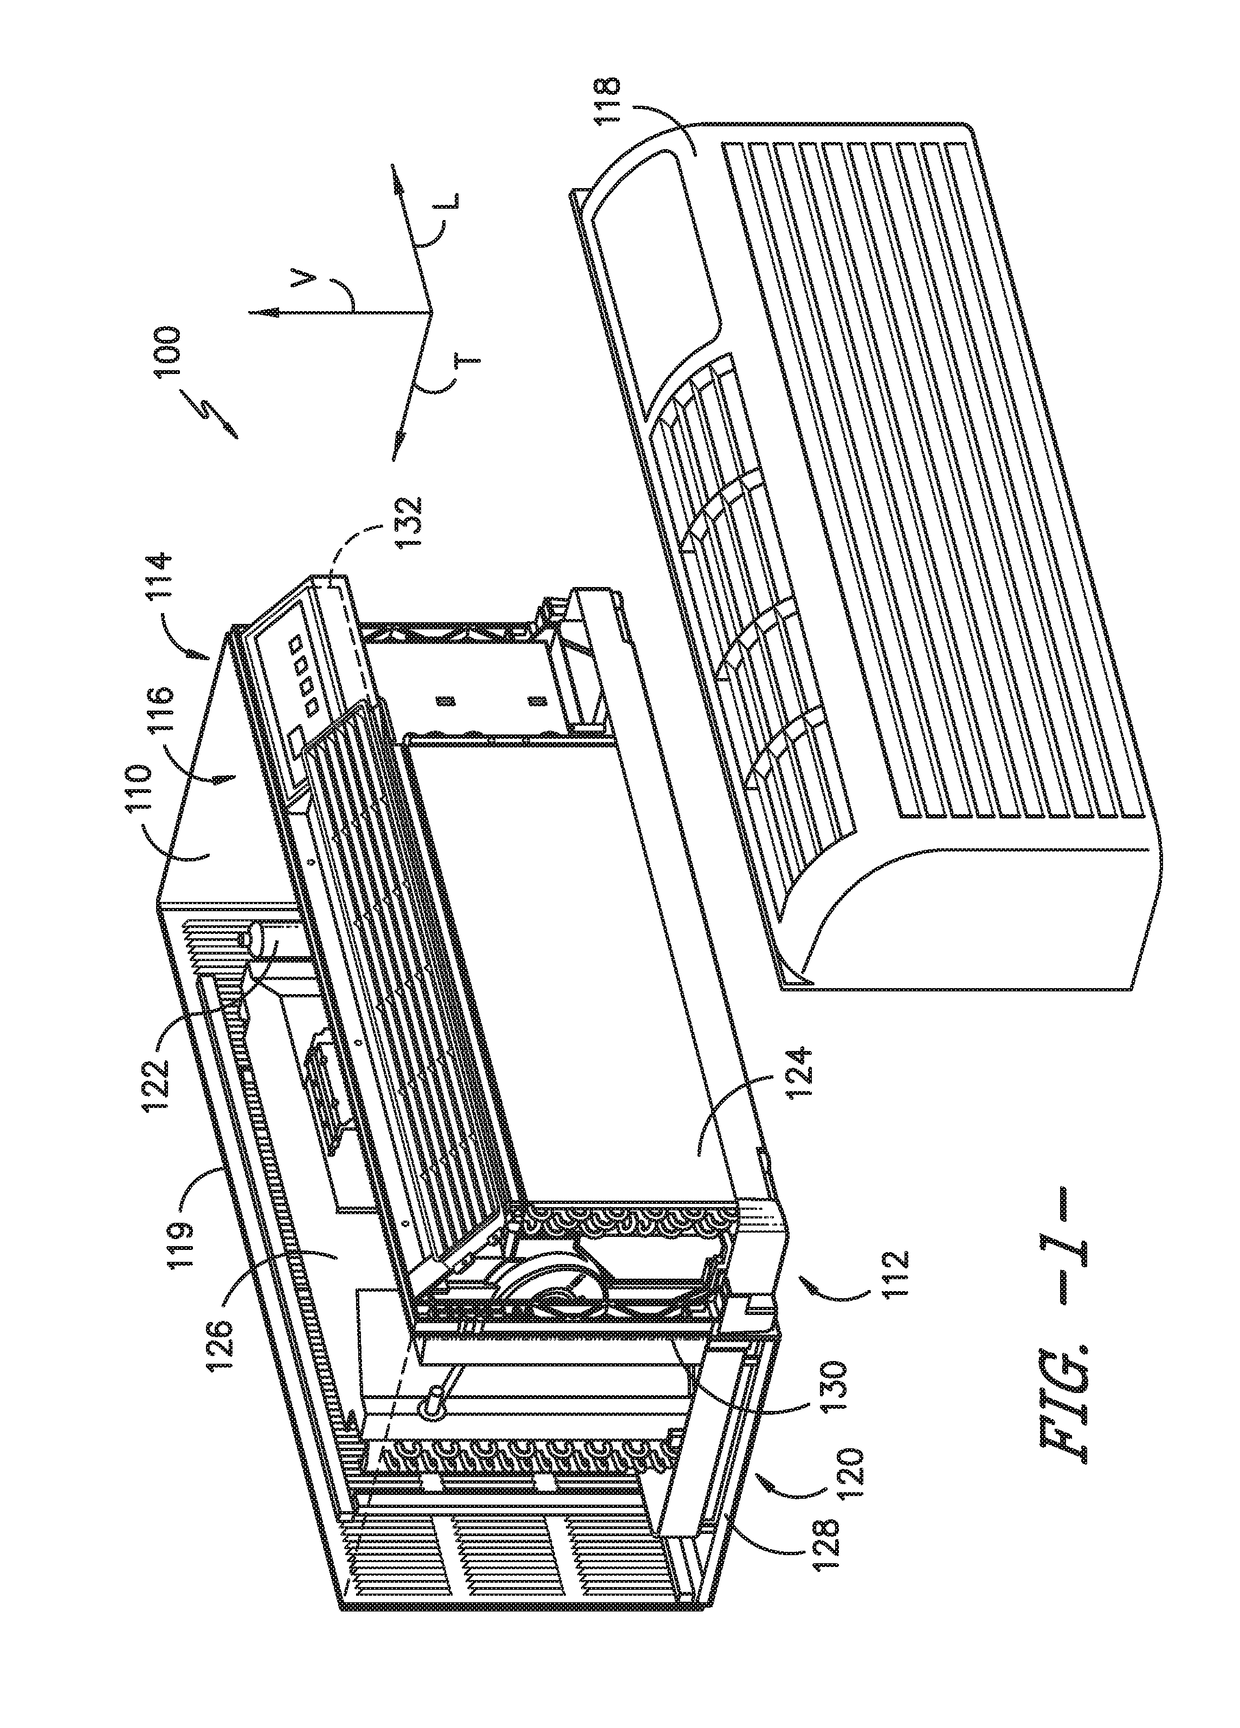 Packaged terminal air conditioner unit